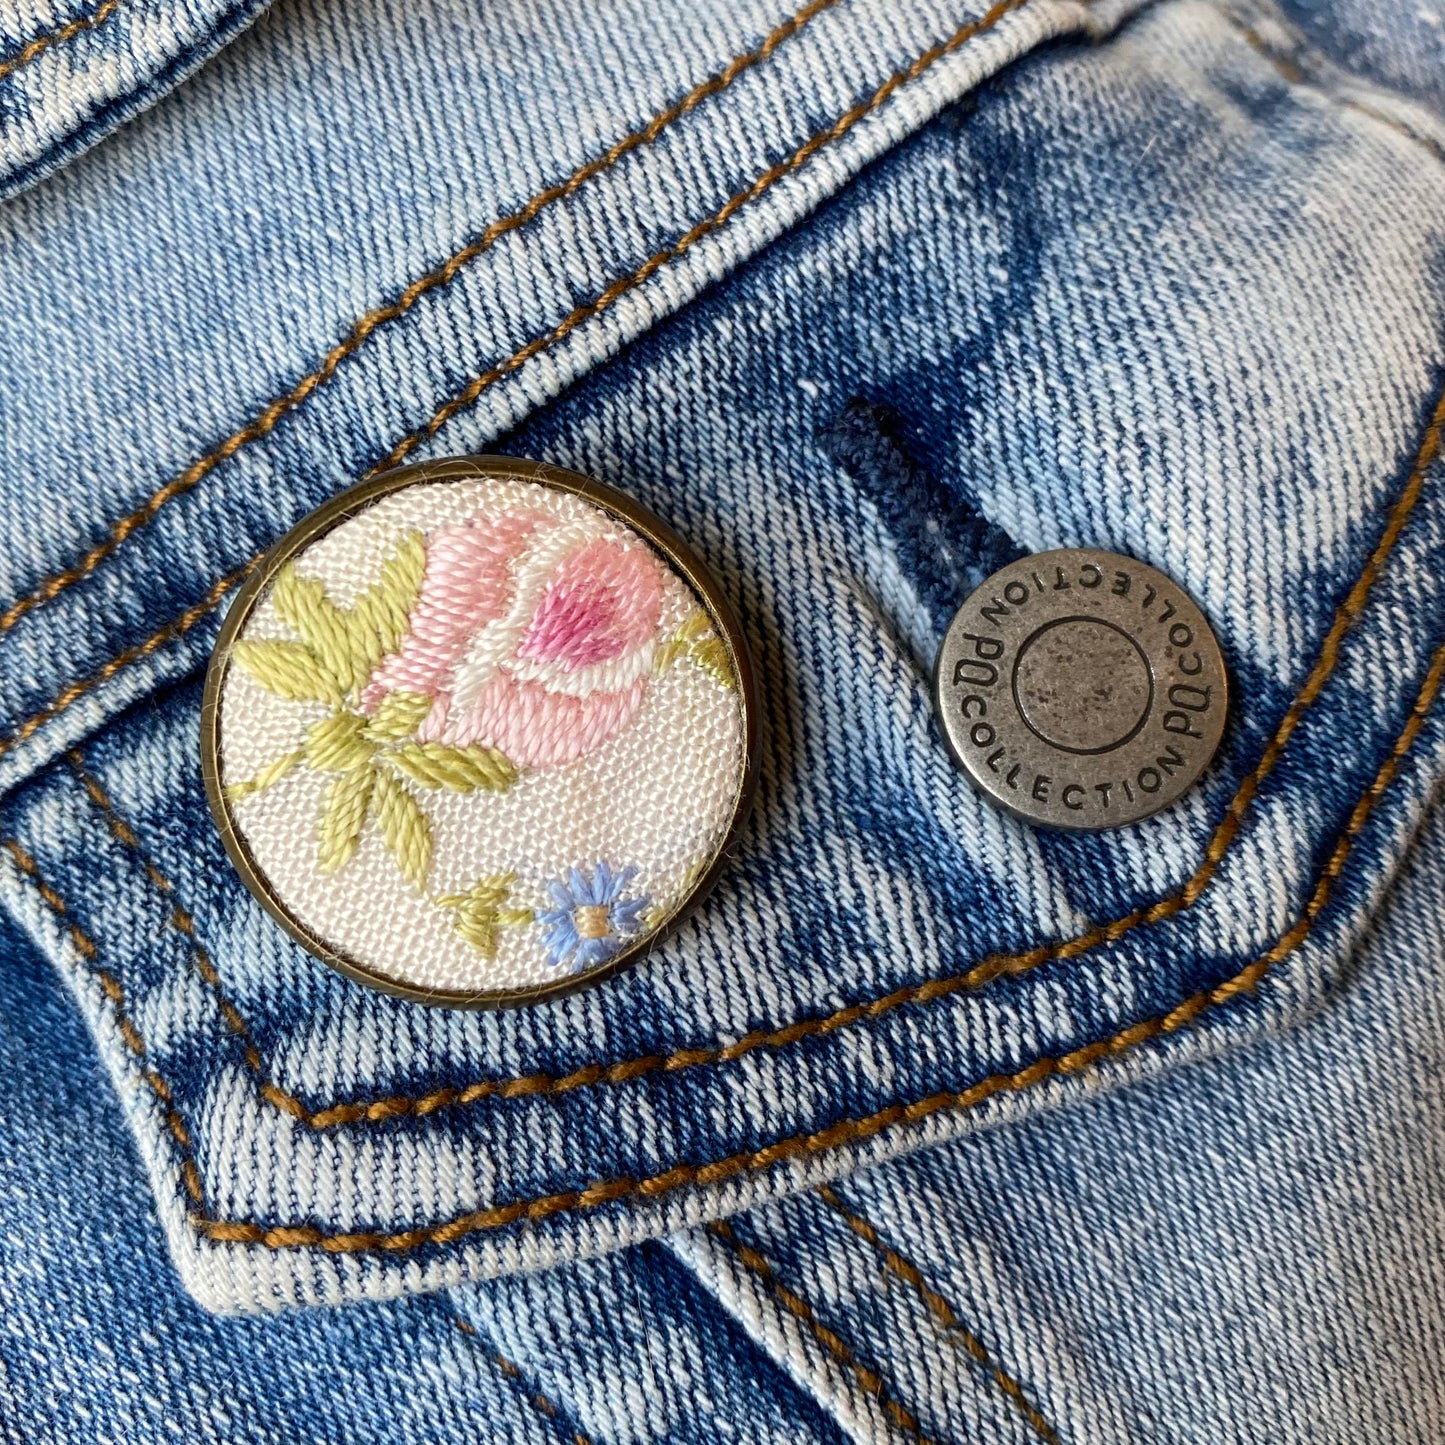 Embroidered pins